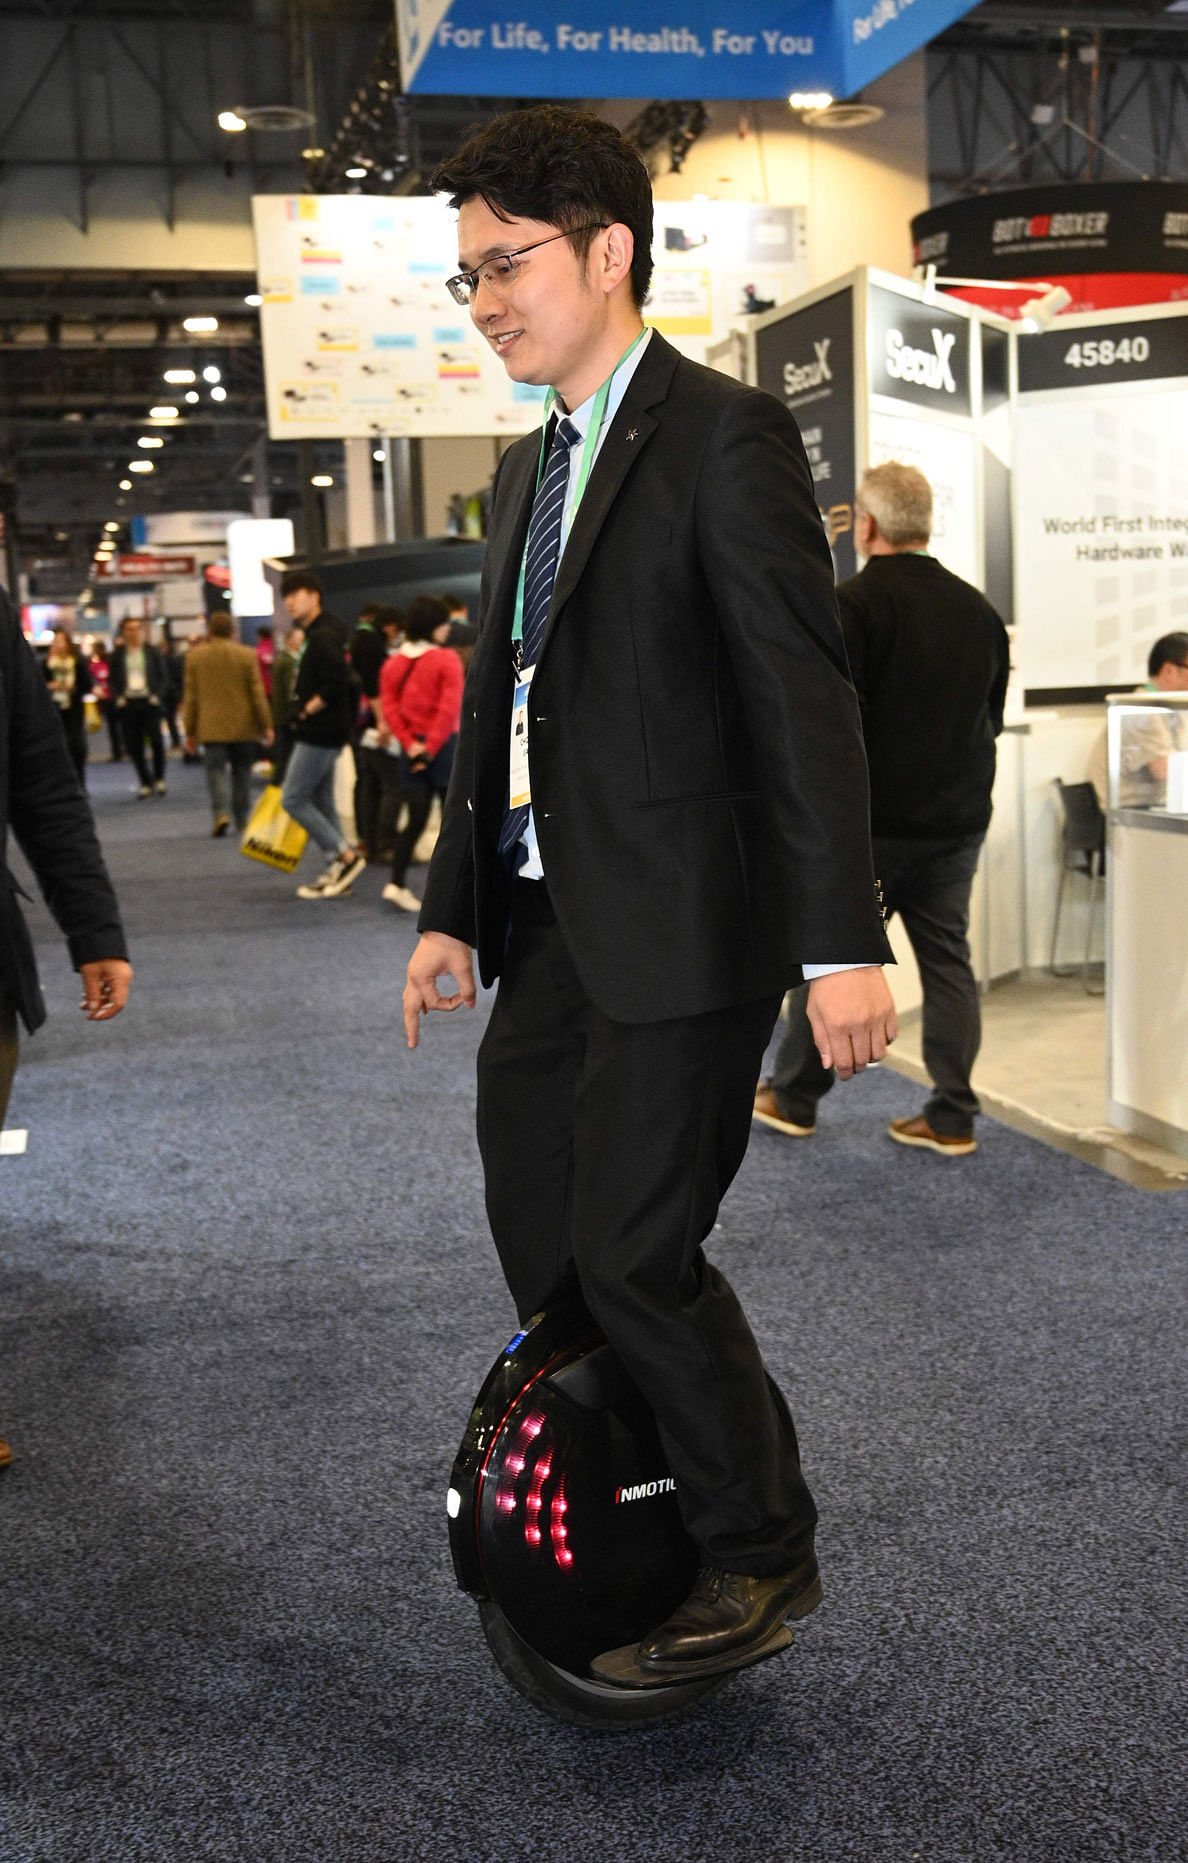 Jason Jiao of Shenzhen, China-based Inmotion Technologies rides Inmotion`s newest monowheel, the Inmotion V8F at the 2020 Consumer Electronics Show (CES) in Las Vegas, Nevada on 9 January 2020. Photo: AFP